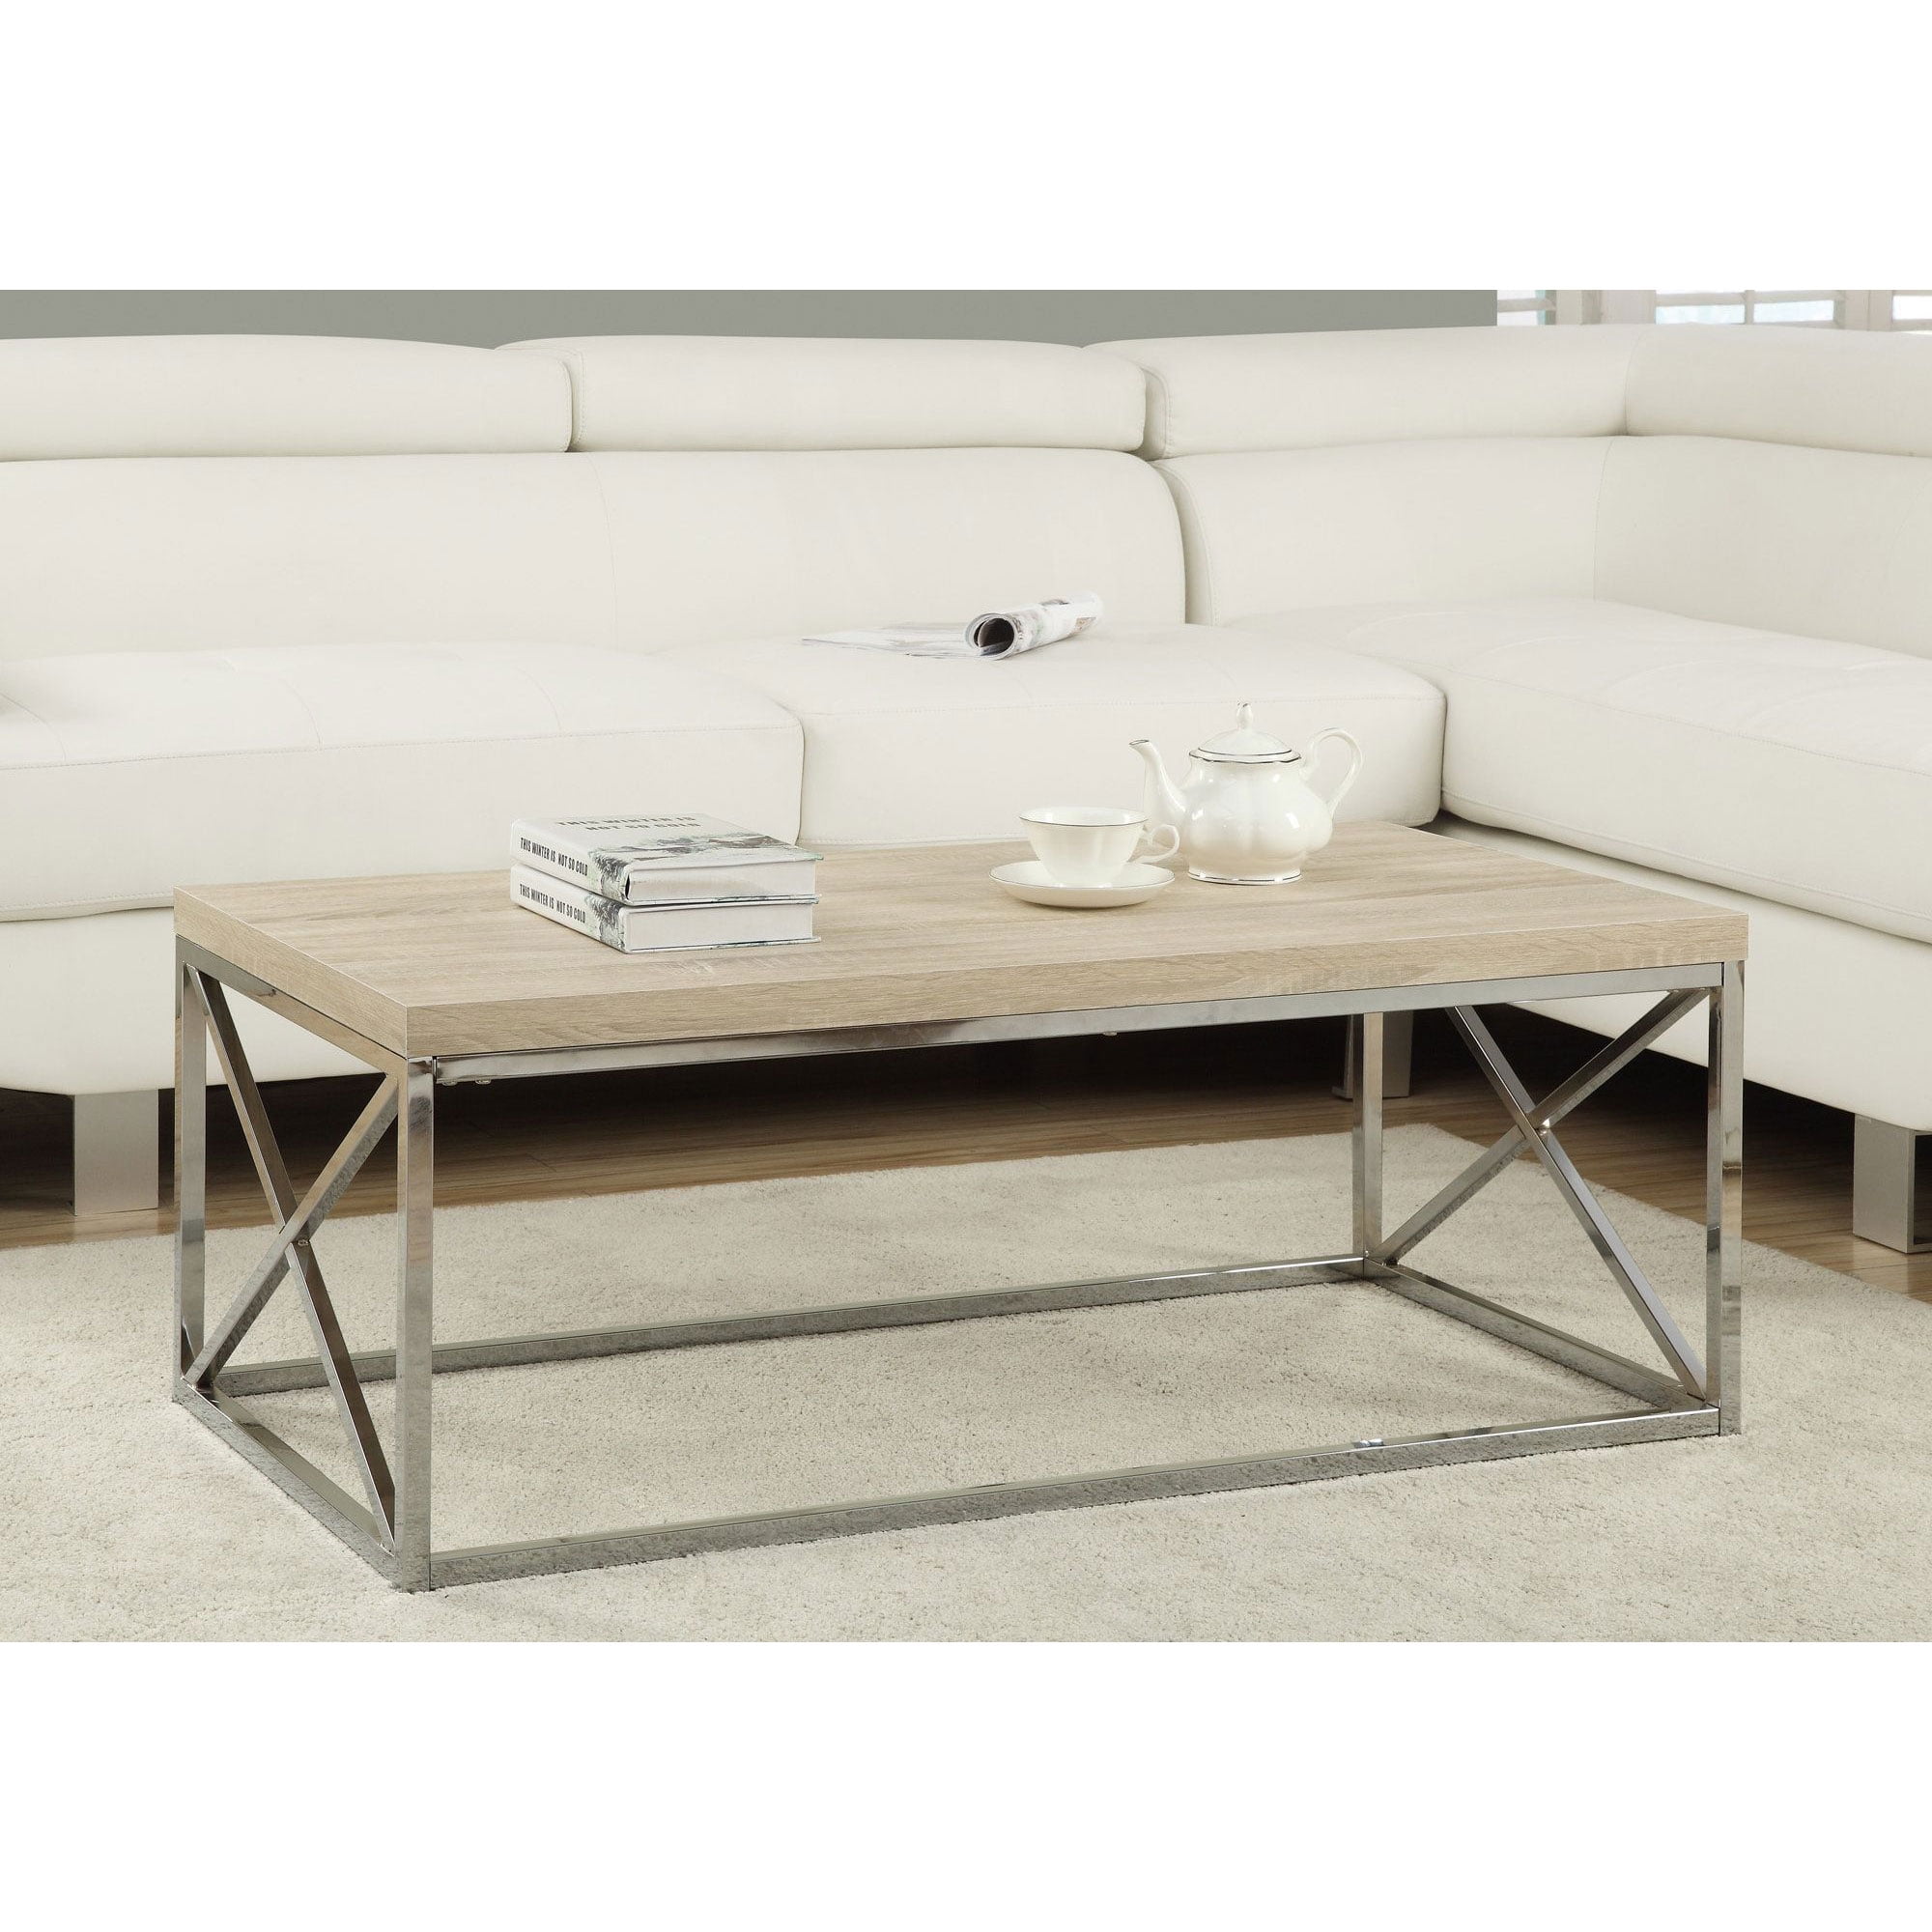 Monarch Coffee Table Natural With Chrome Metal